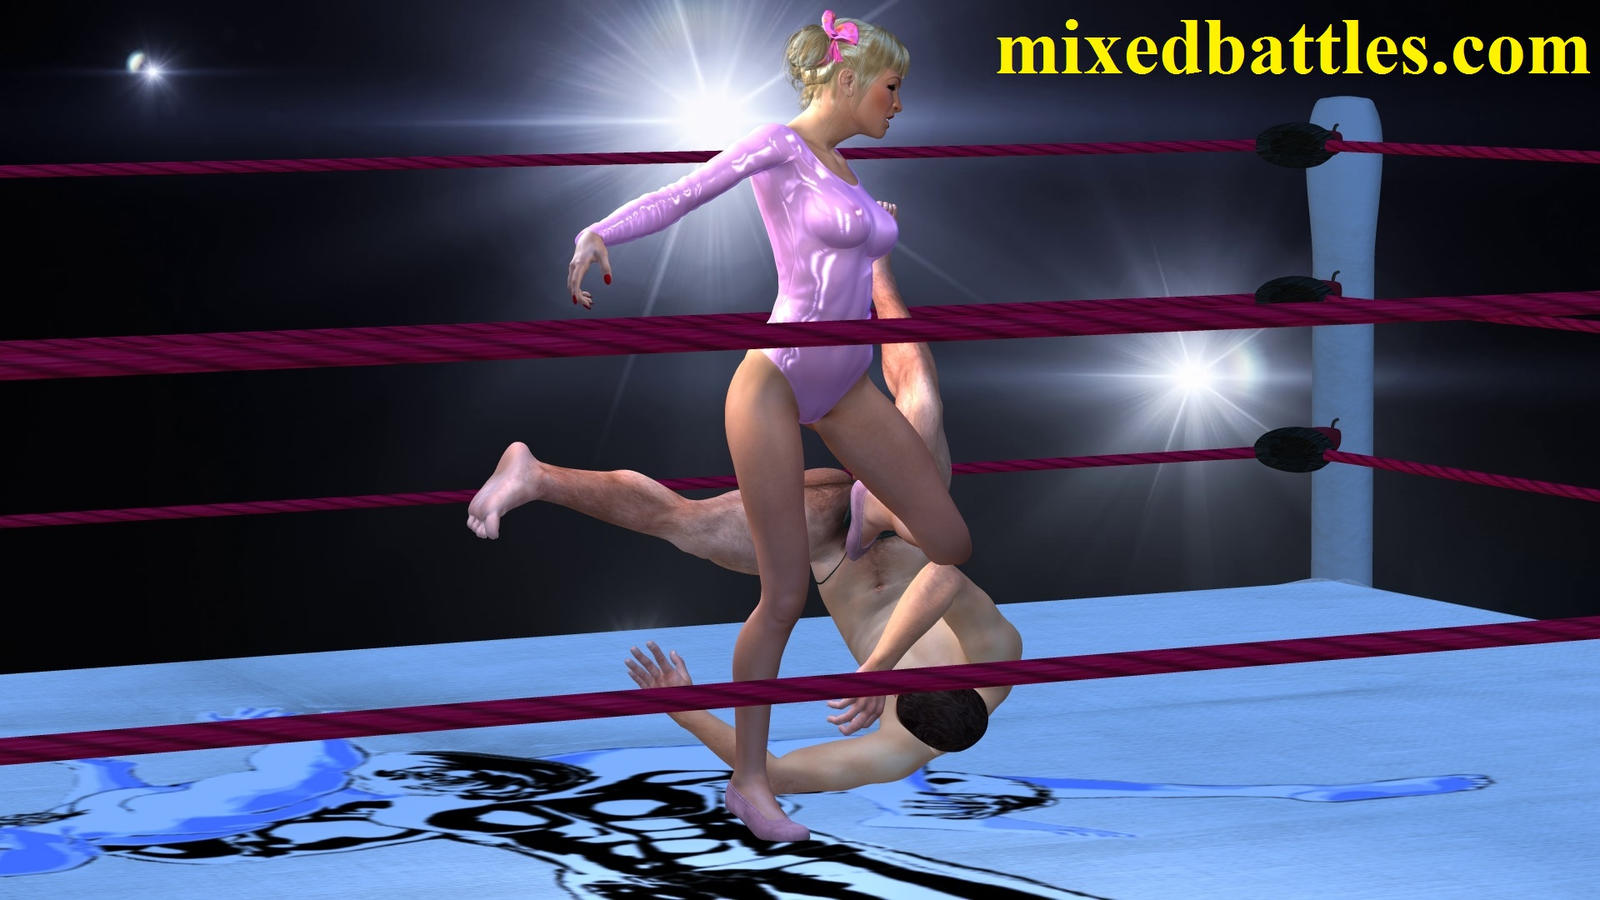 It contents weekly updating FullHD 3D art galleries: mixed wrestling, catfi...